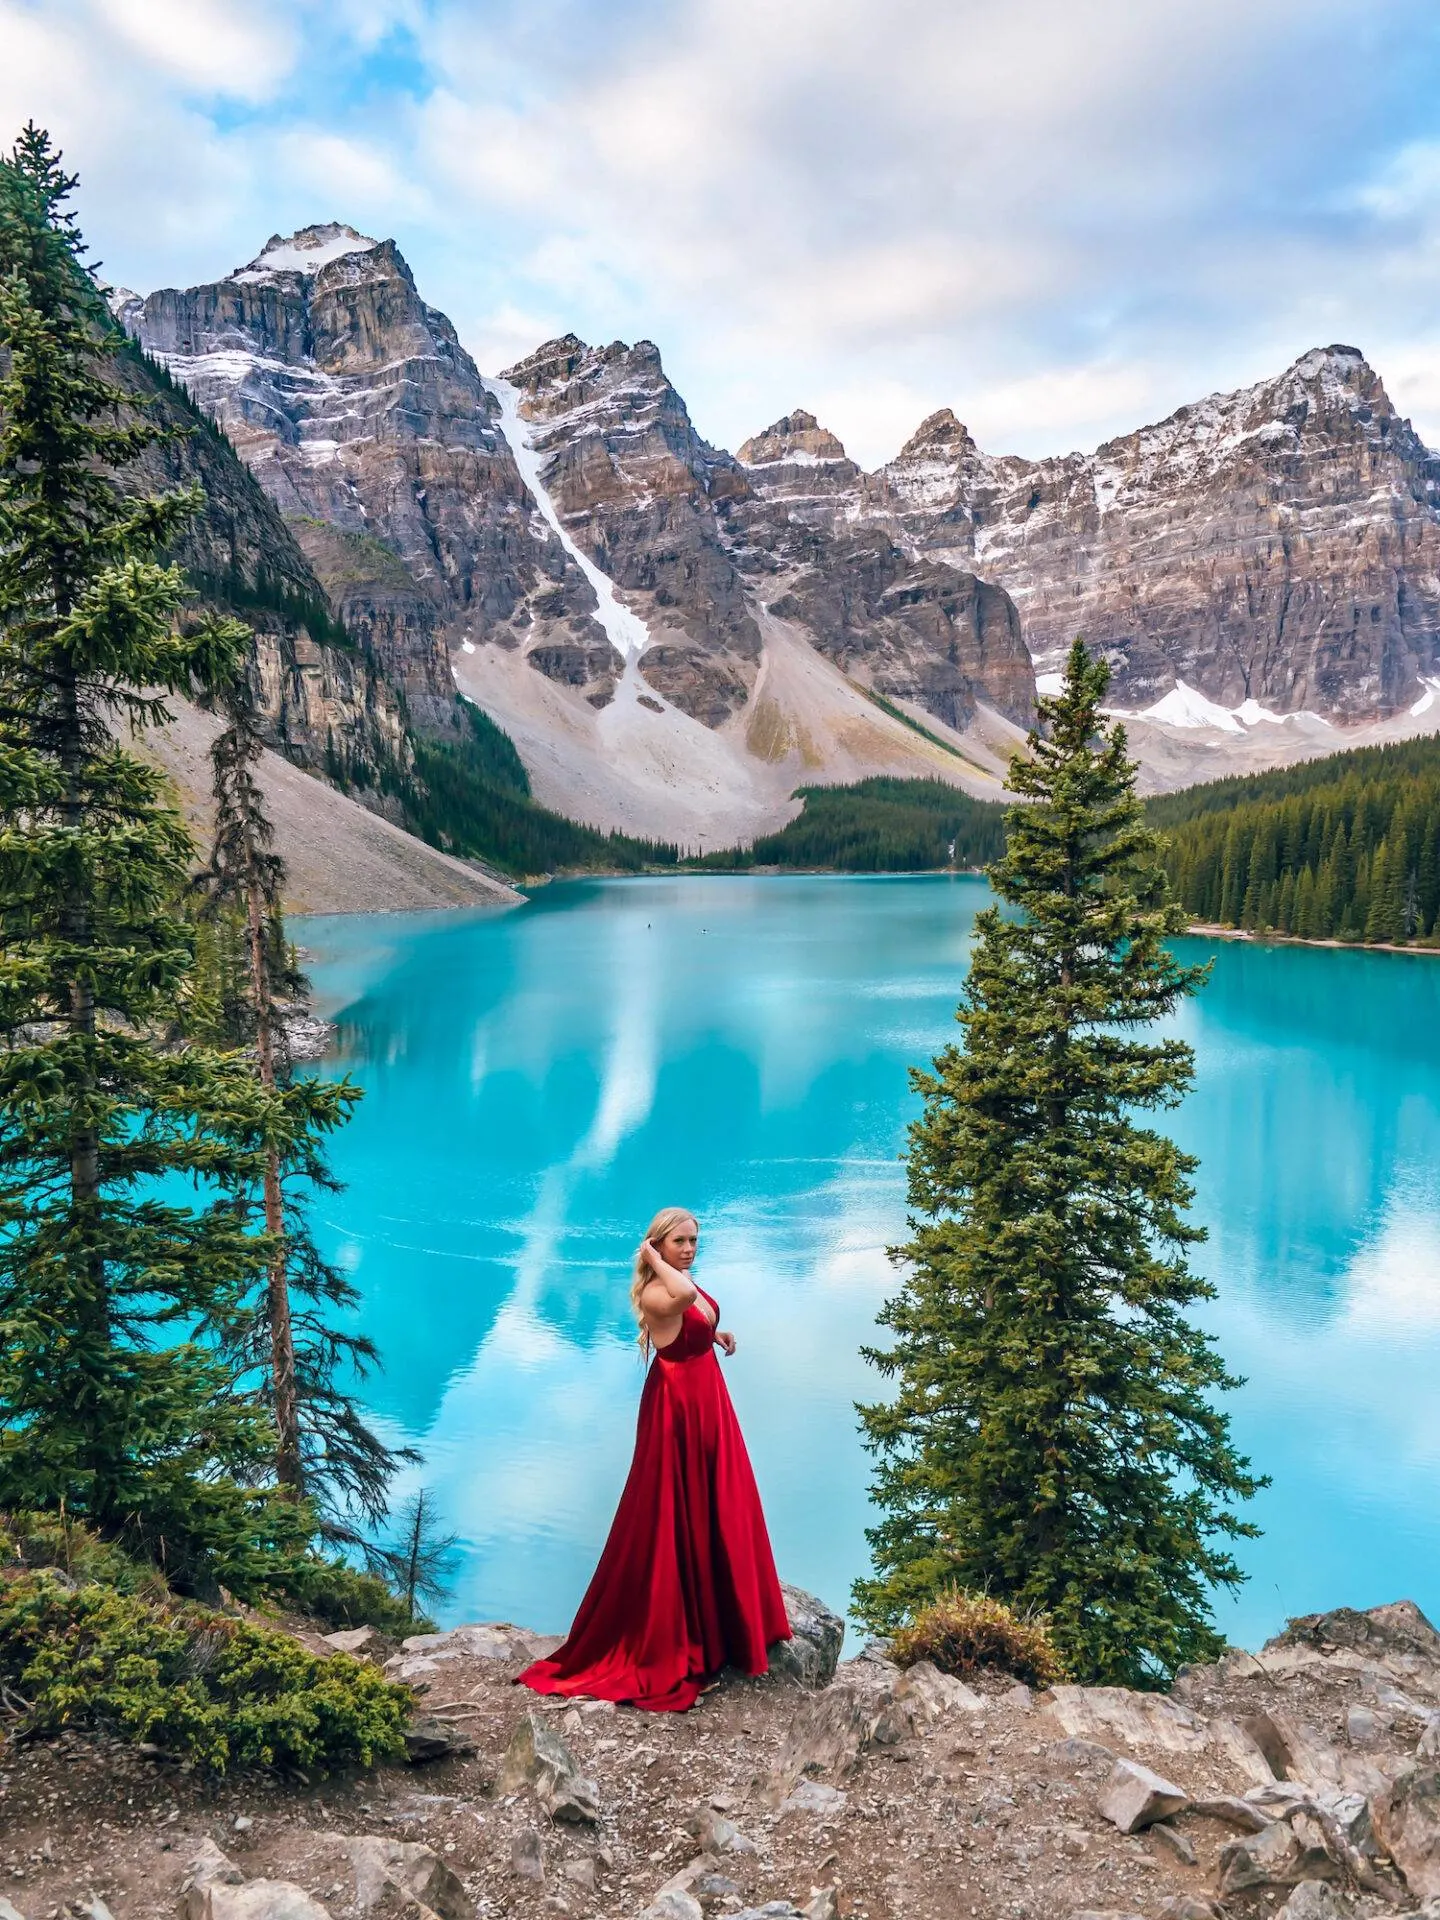 Visiting Banff National Park soon? Don't miss this guide of the 50 best things to in Banff for every kind of traveler! I recently spent 8 days exploring the area and took notes along the way so I could write you the most comprehensive guide possible. This guide includes all the top attractions, hikes, restaurants, and sights you definitely won't want to miss when you visit Banff National Park. I also include any tips you might need when visiting the area! Pictured here: Moraine Lake after sunrise